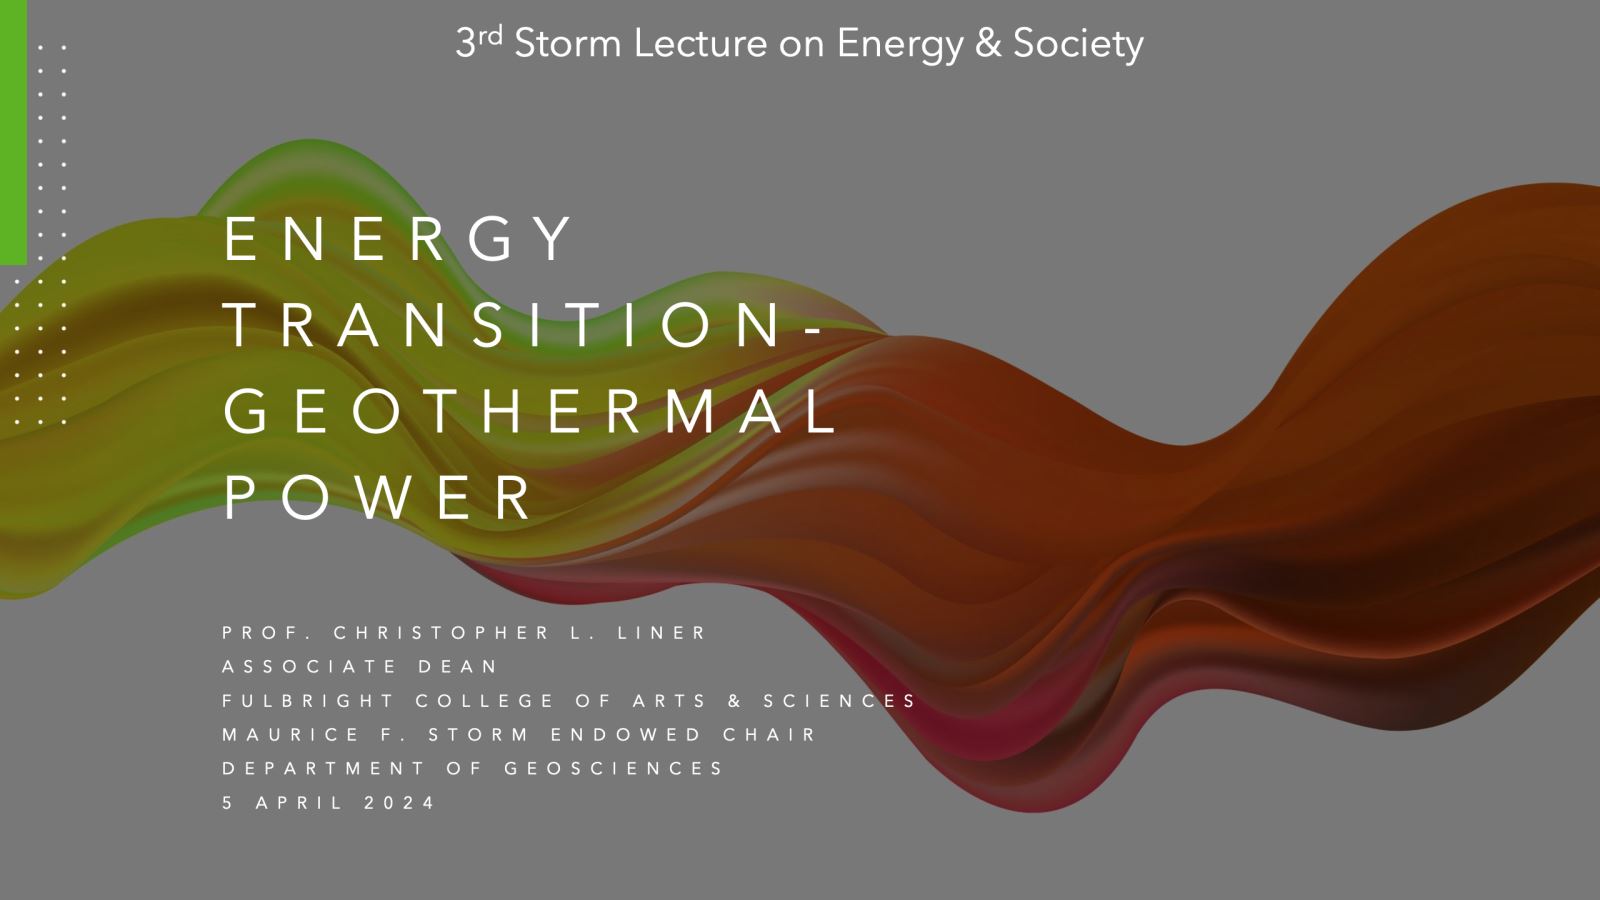 flyer for energy transition-geothermal power lecture